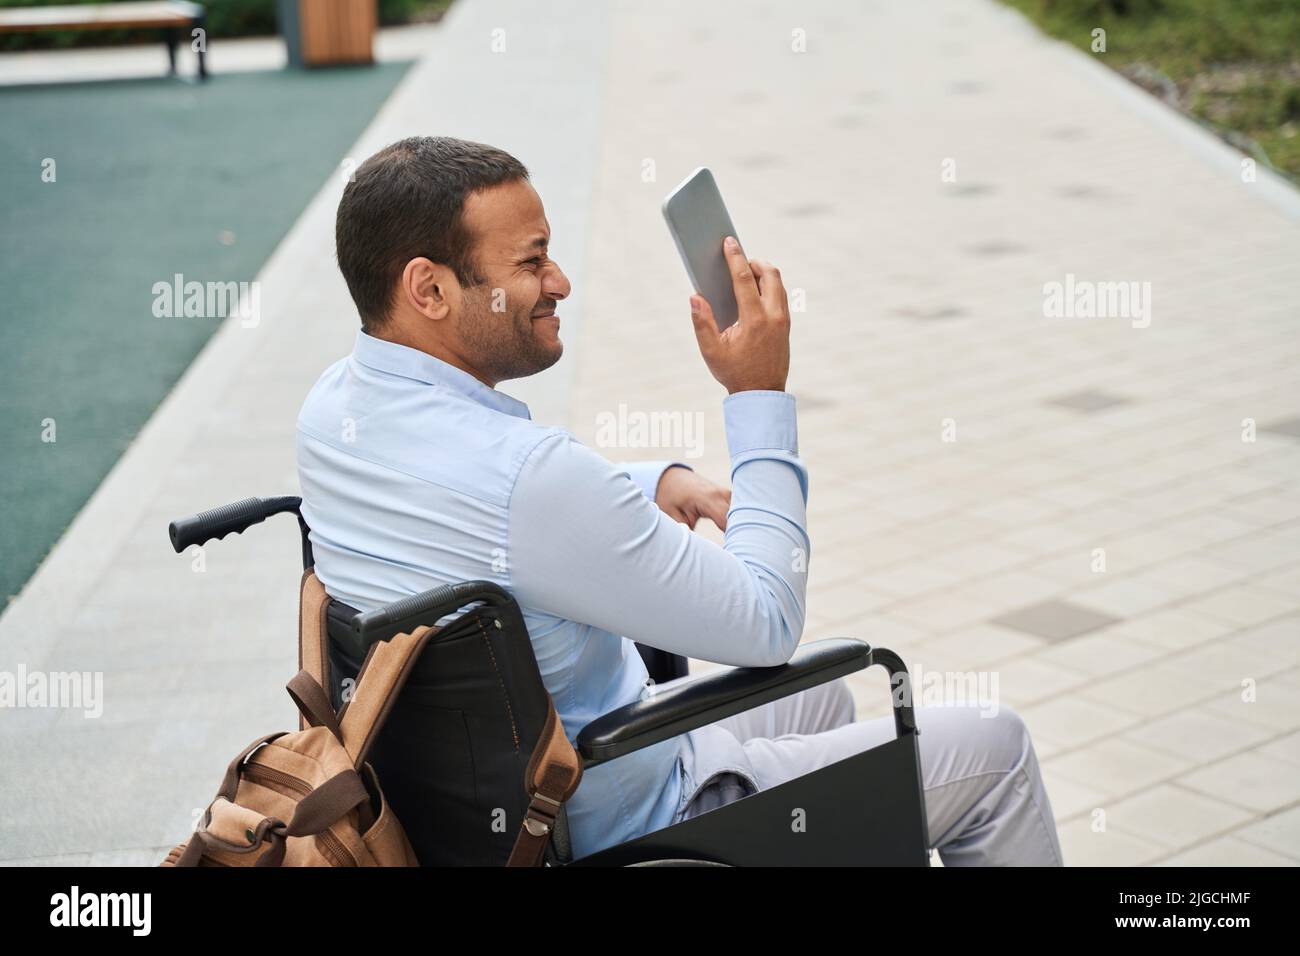 Male person with disability taking selfies outdoors Stock Photo